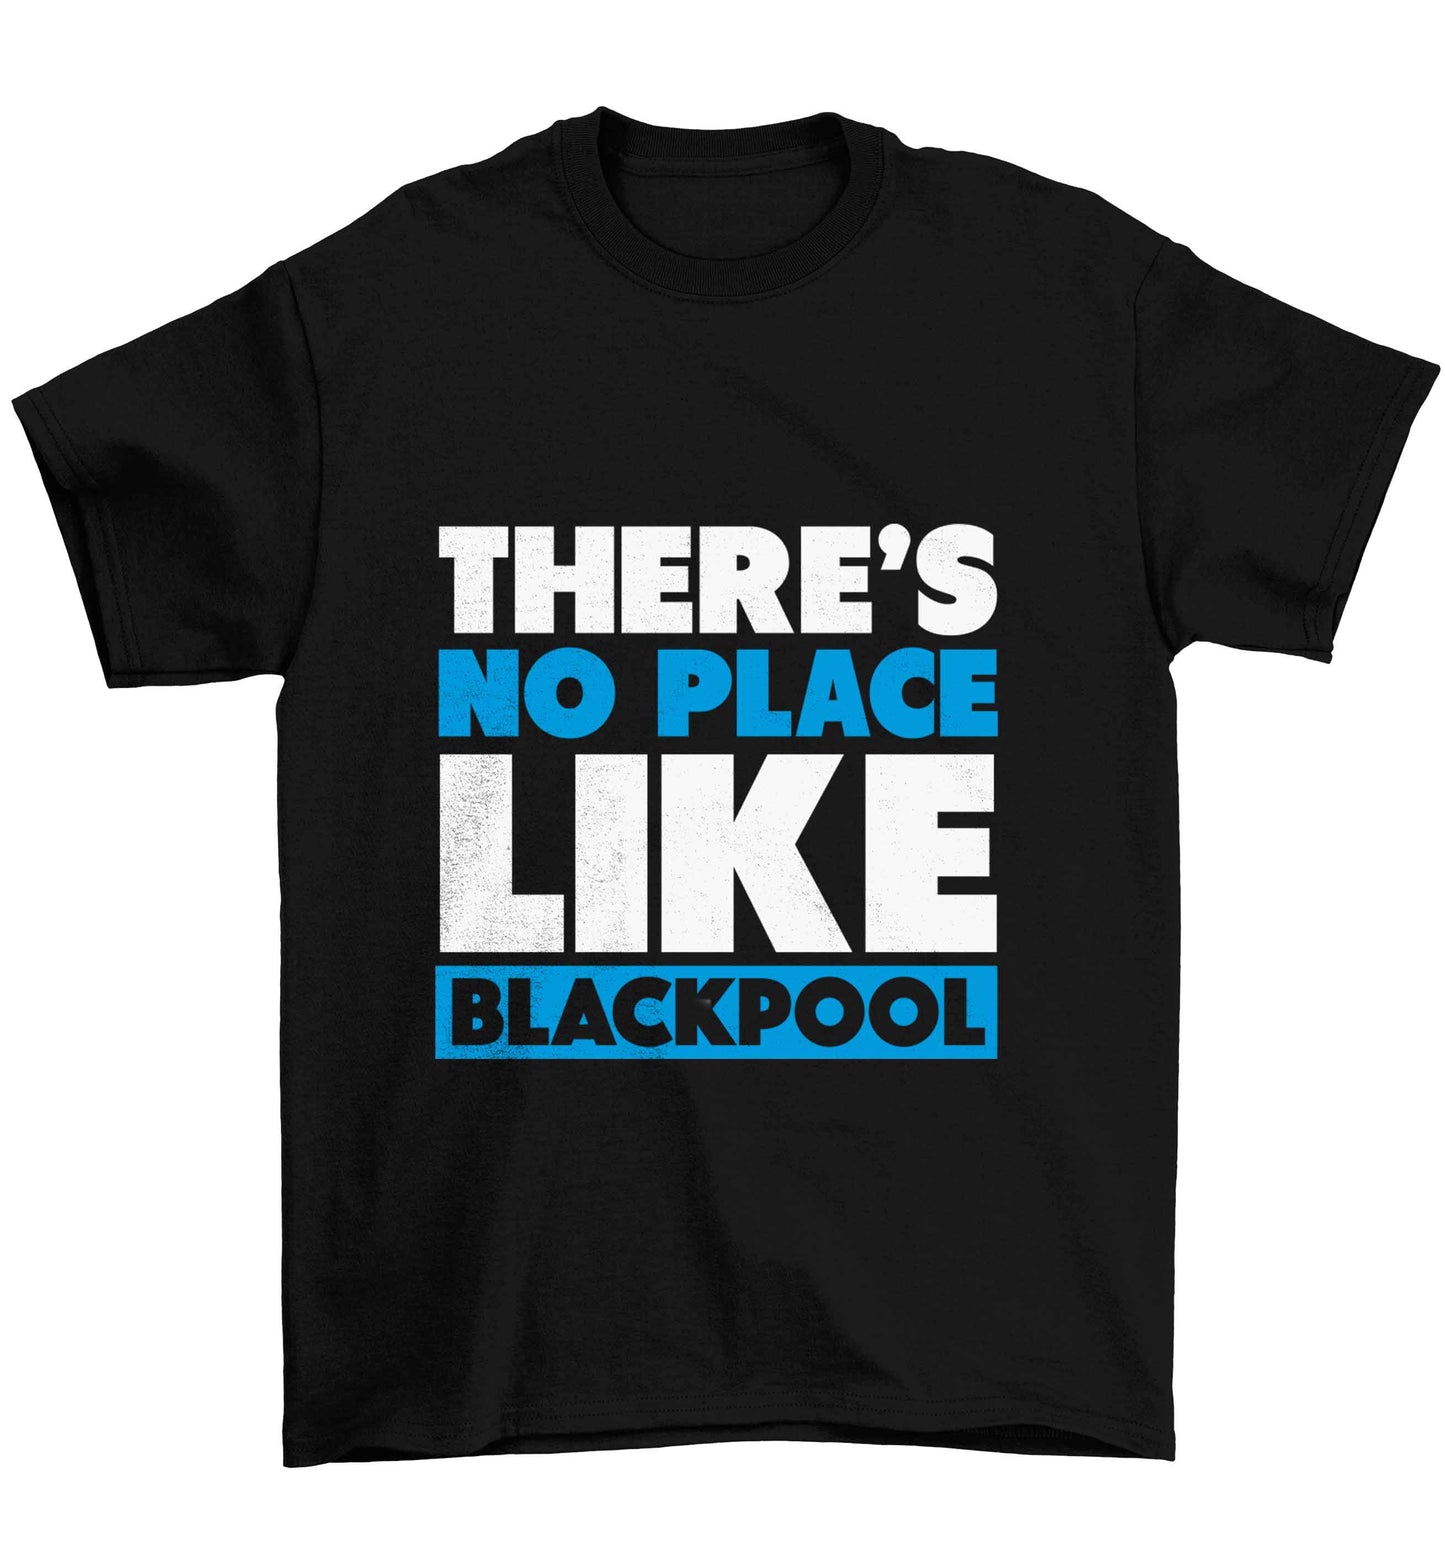 There's no place like Blackpool Children's black Tshirt 12-13 Years